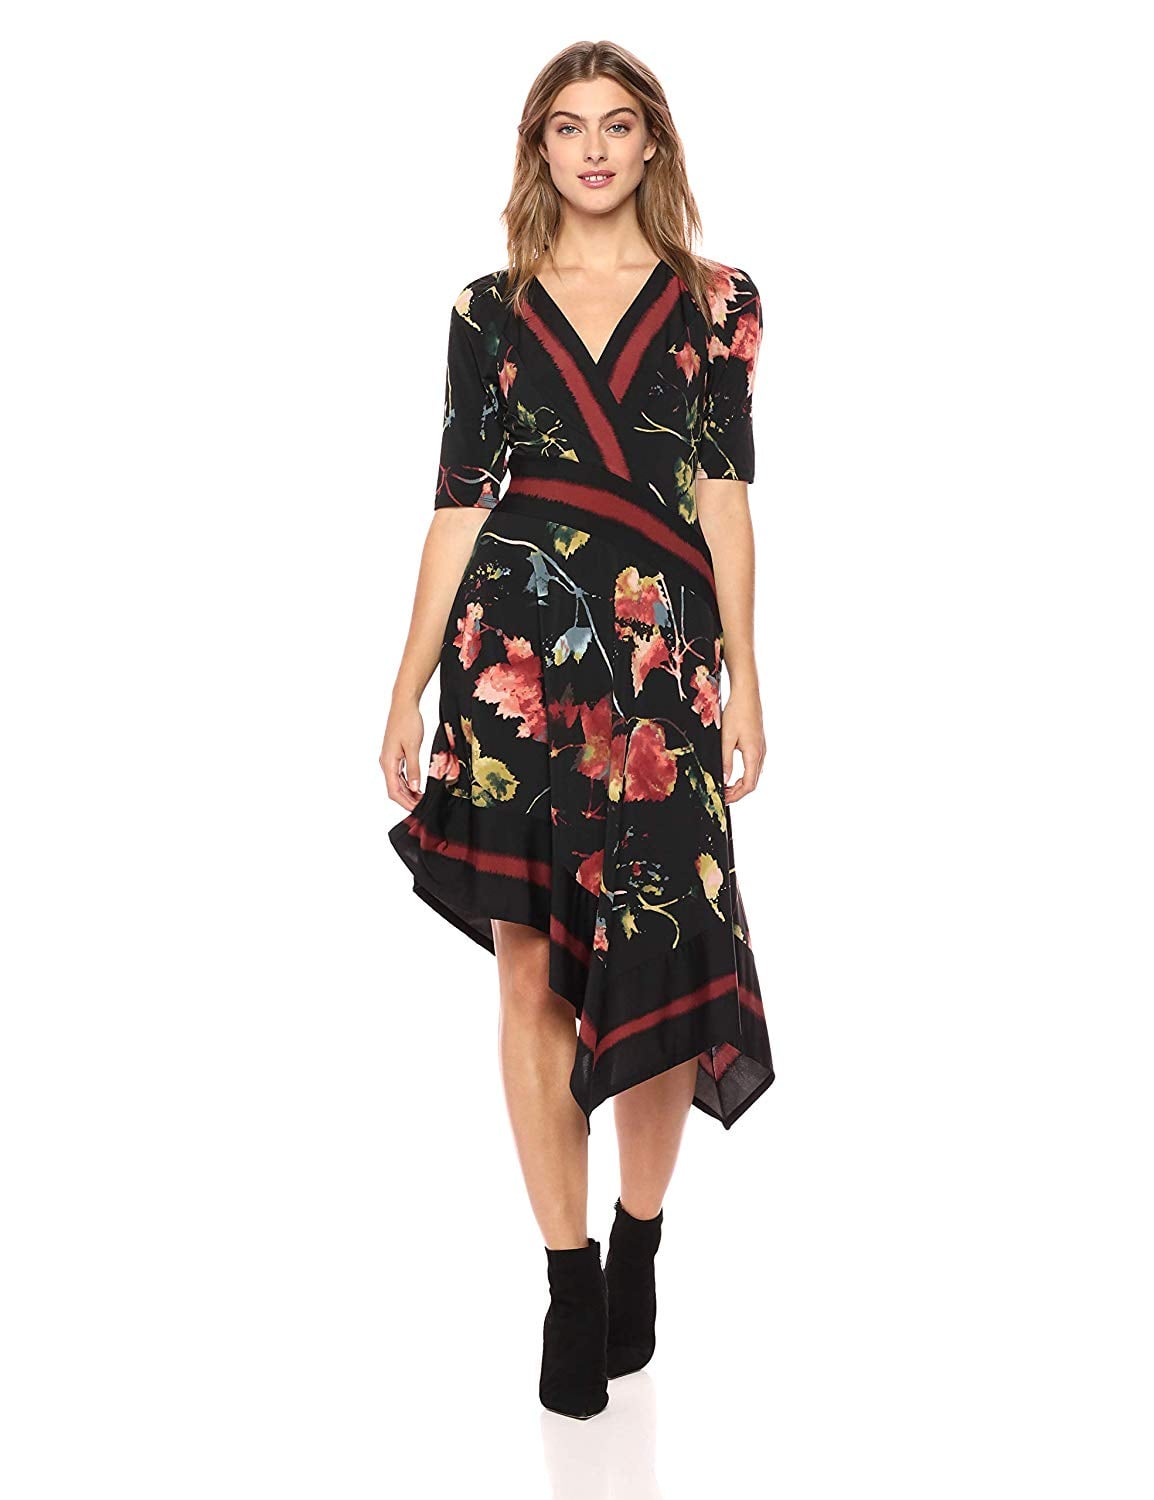 BCBGMaxAzria Floral Asymmetrical Faux Wrap Dress | Amazon's Fashion Section  Is Overflowing With Summer Dresses, but These 17 Picks Are Irresistible |  POPSUGAR Fashion Photo 14